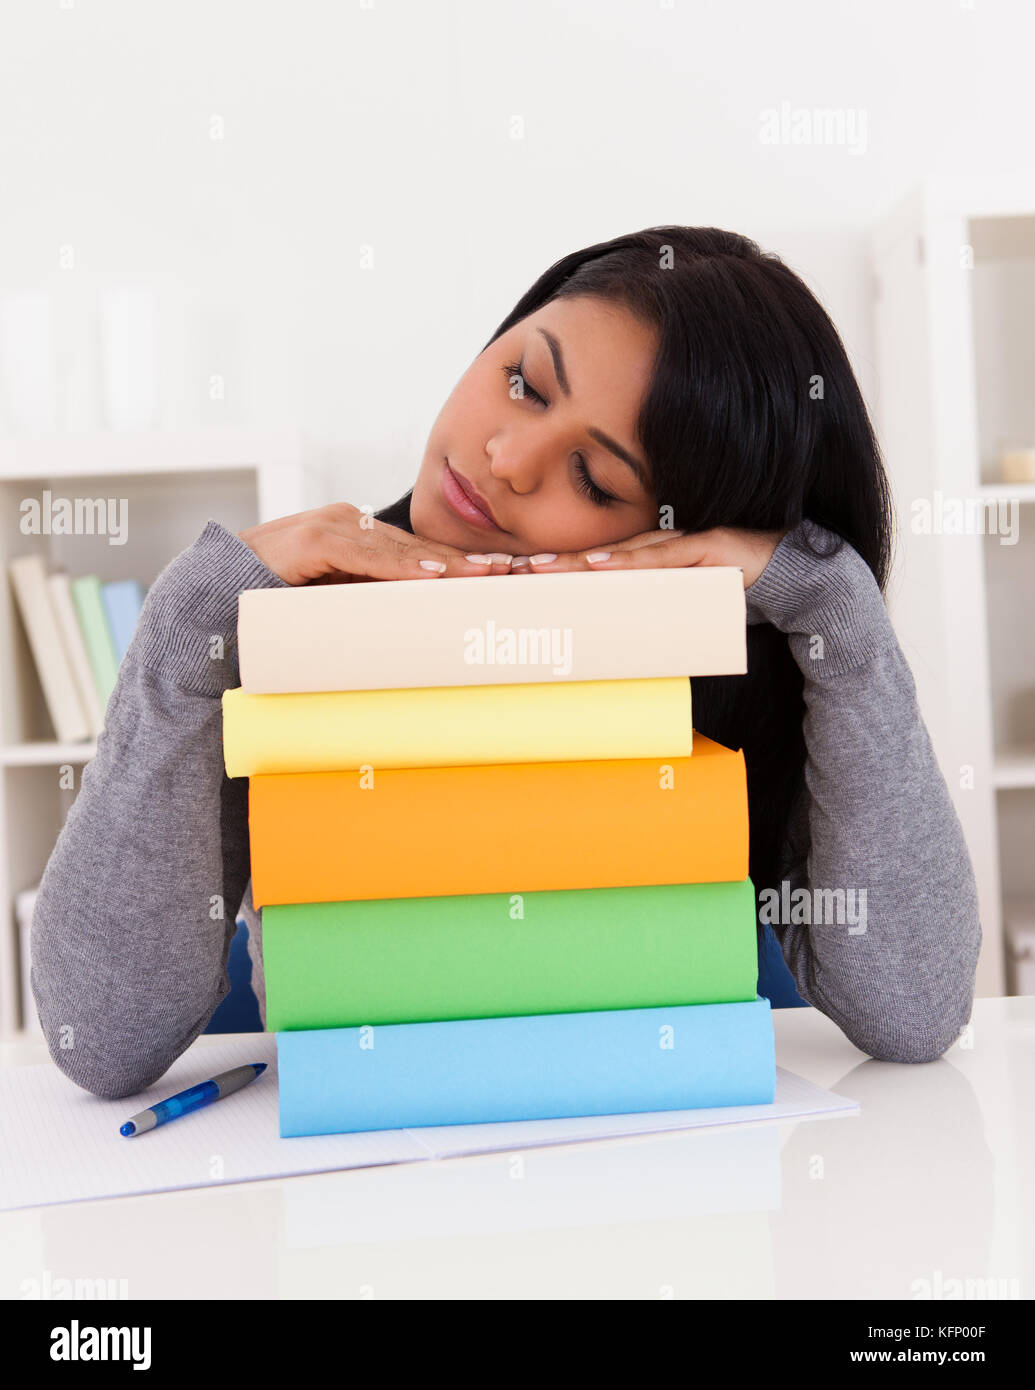 Portrait Of Young Woman Sleeping While Studying At Home Stock Photo